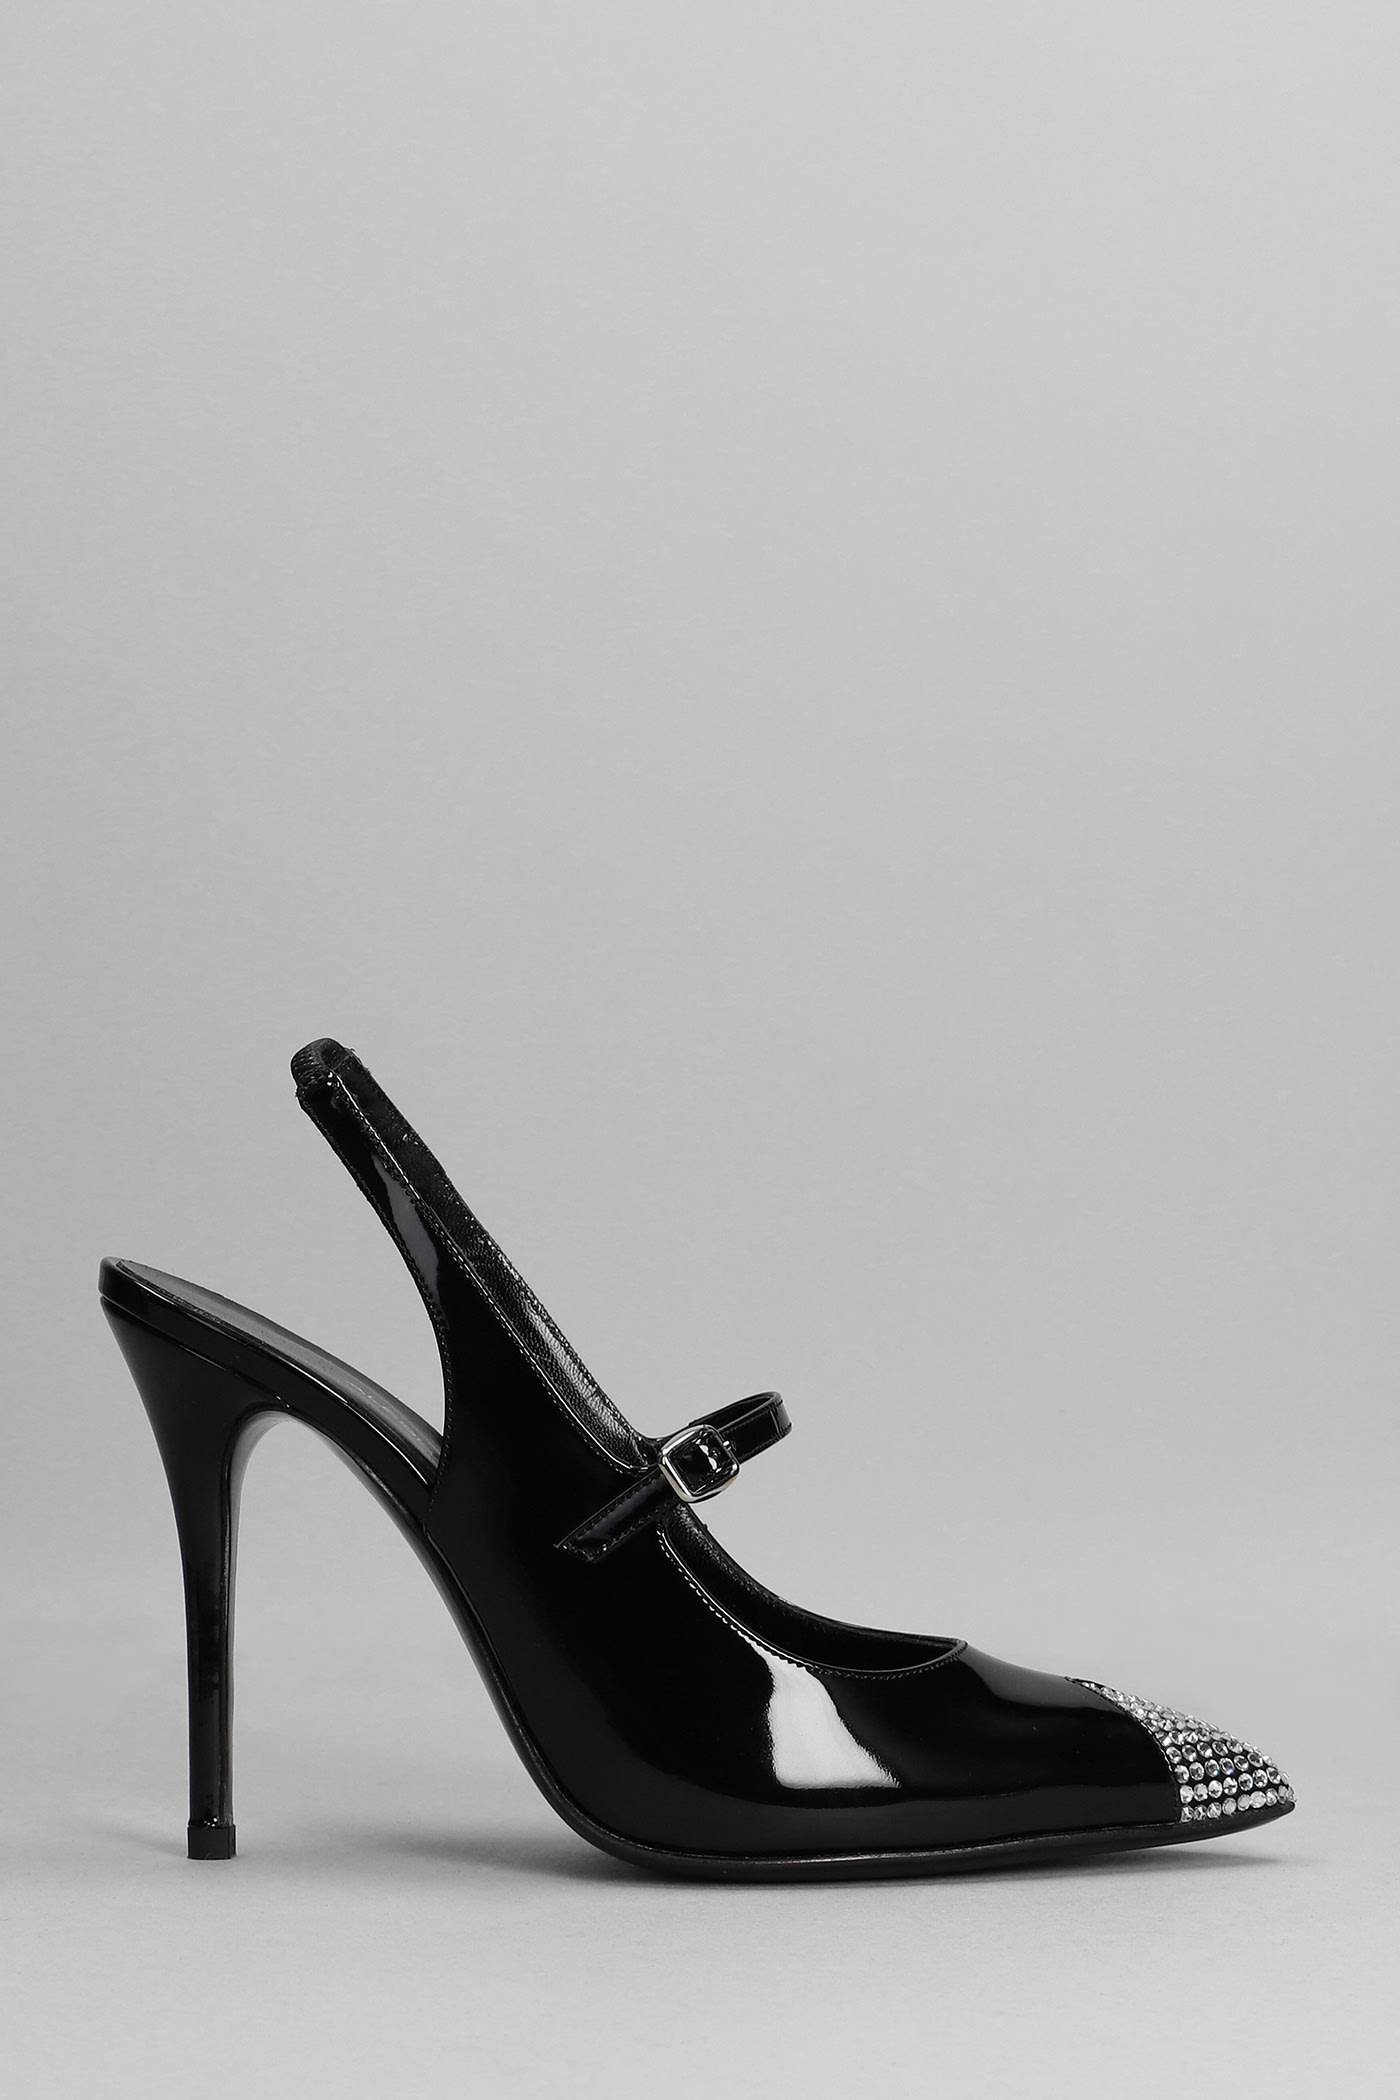 Alessandra Rich Pumps In Black Patent Leather